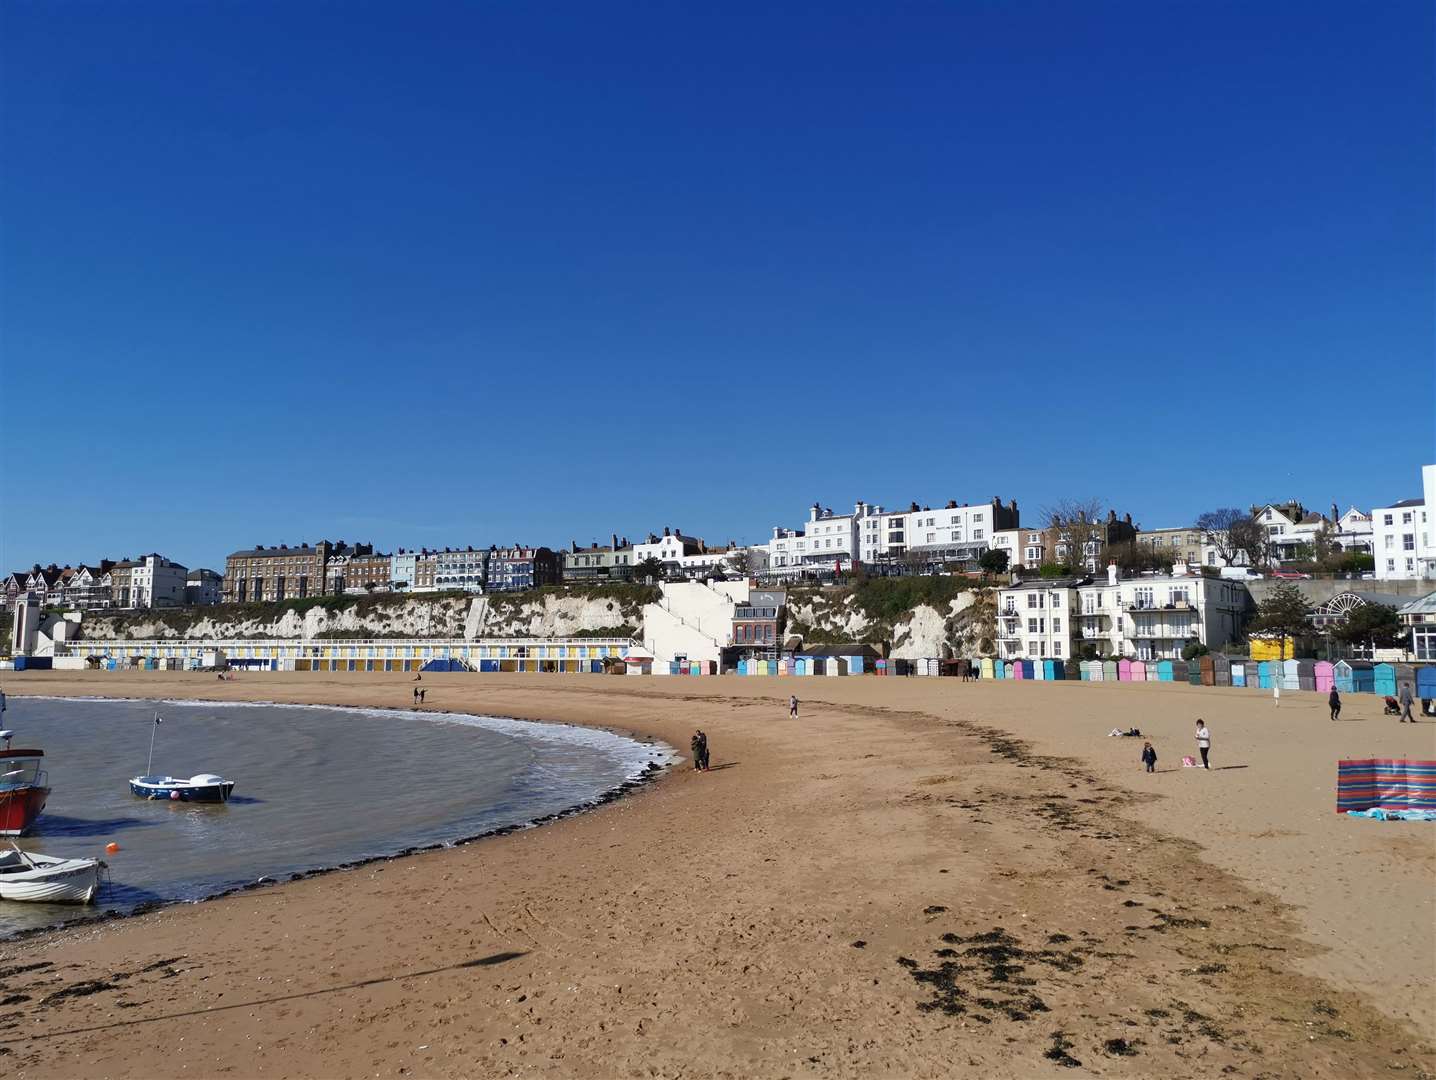 A pollution warning has been issued for Viking Bay